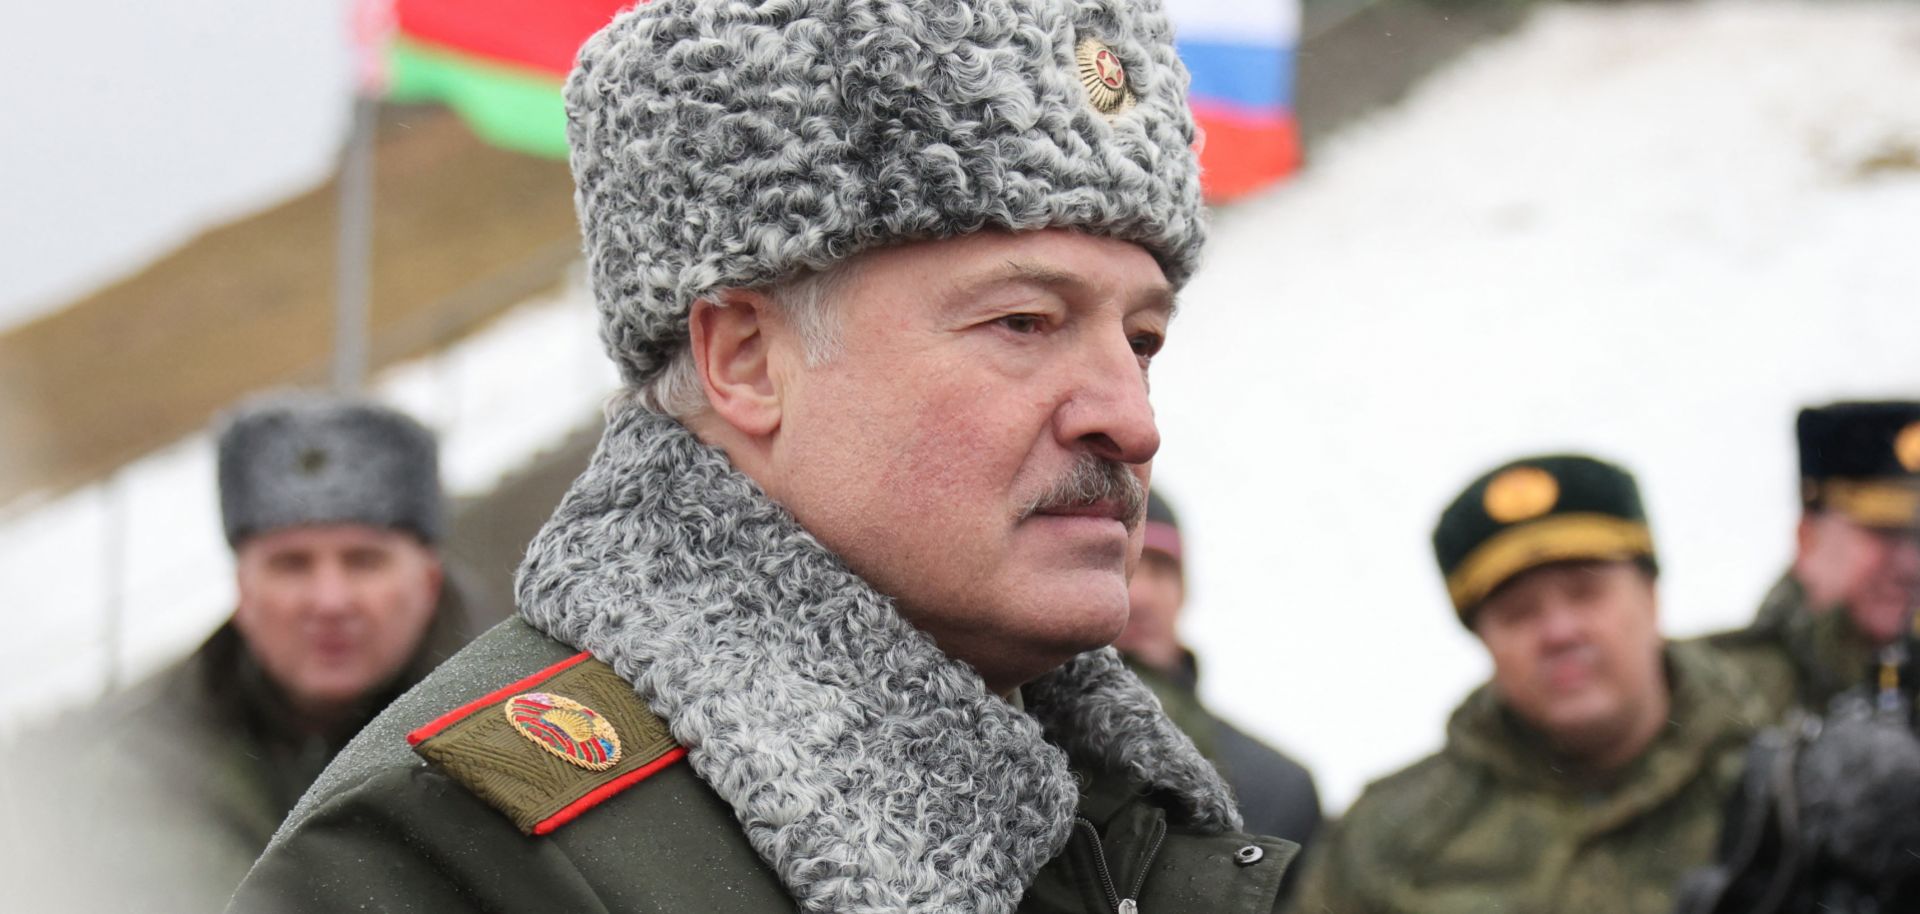 Belarusian President Alexander Lukashenko attends joint exercises of Russian and Belarusian forces at a firing range near a town outside Minsk on Feb. 17, 2022. 